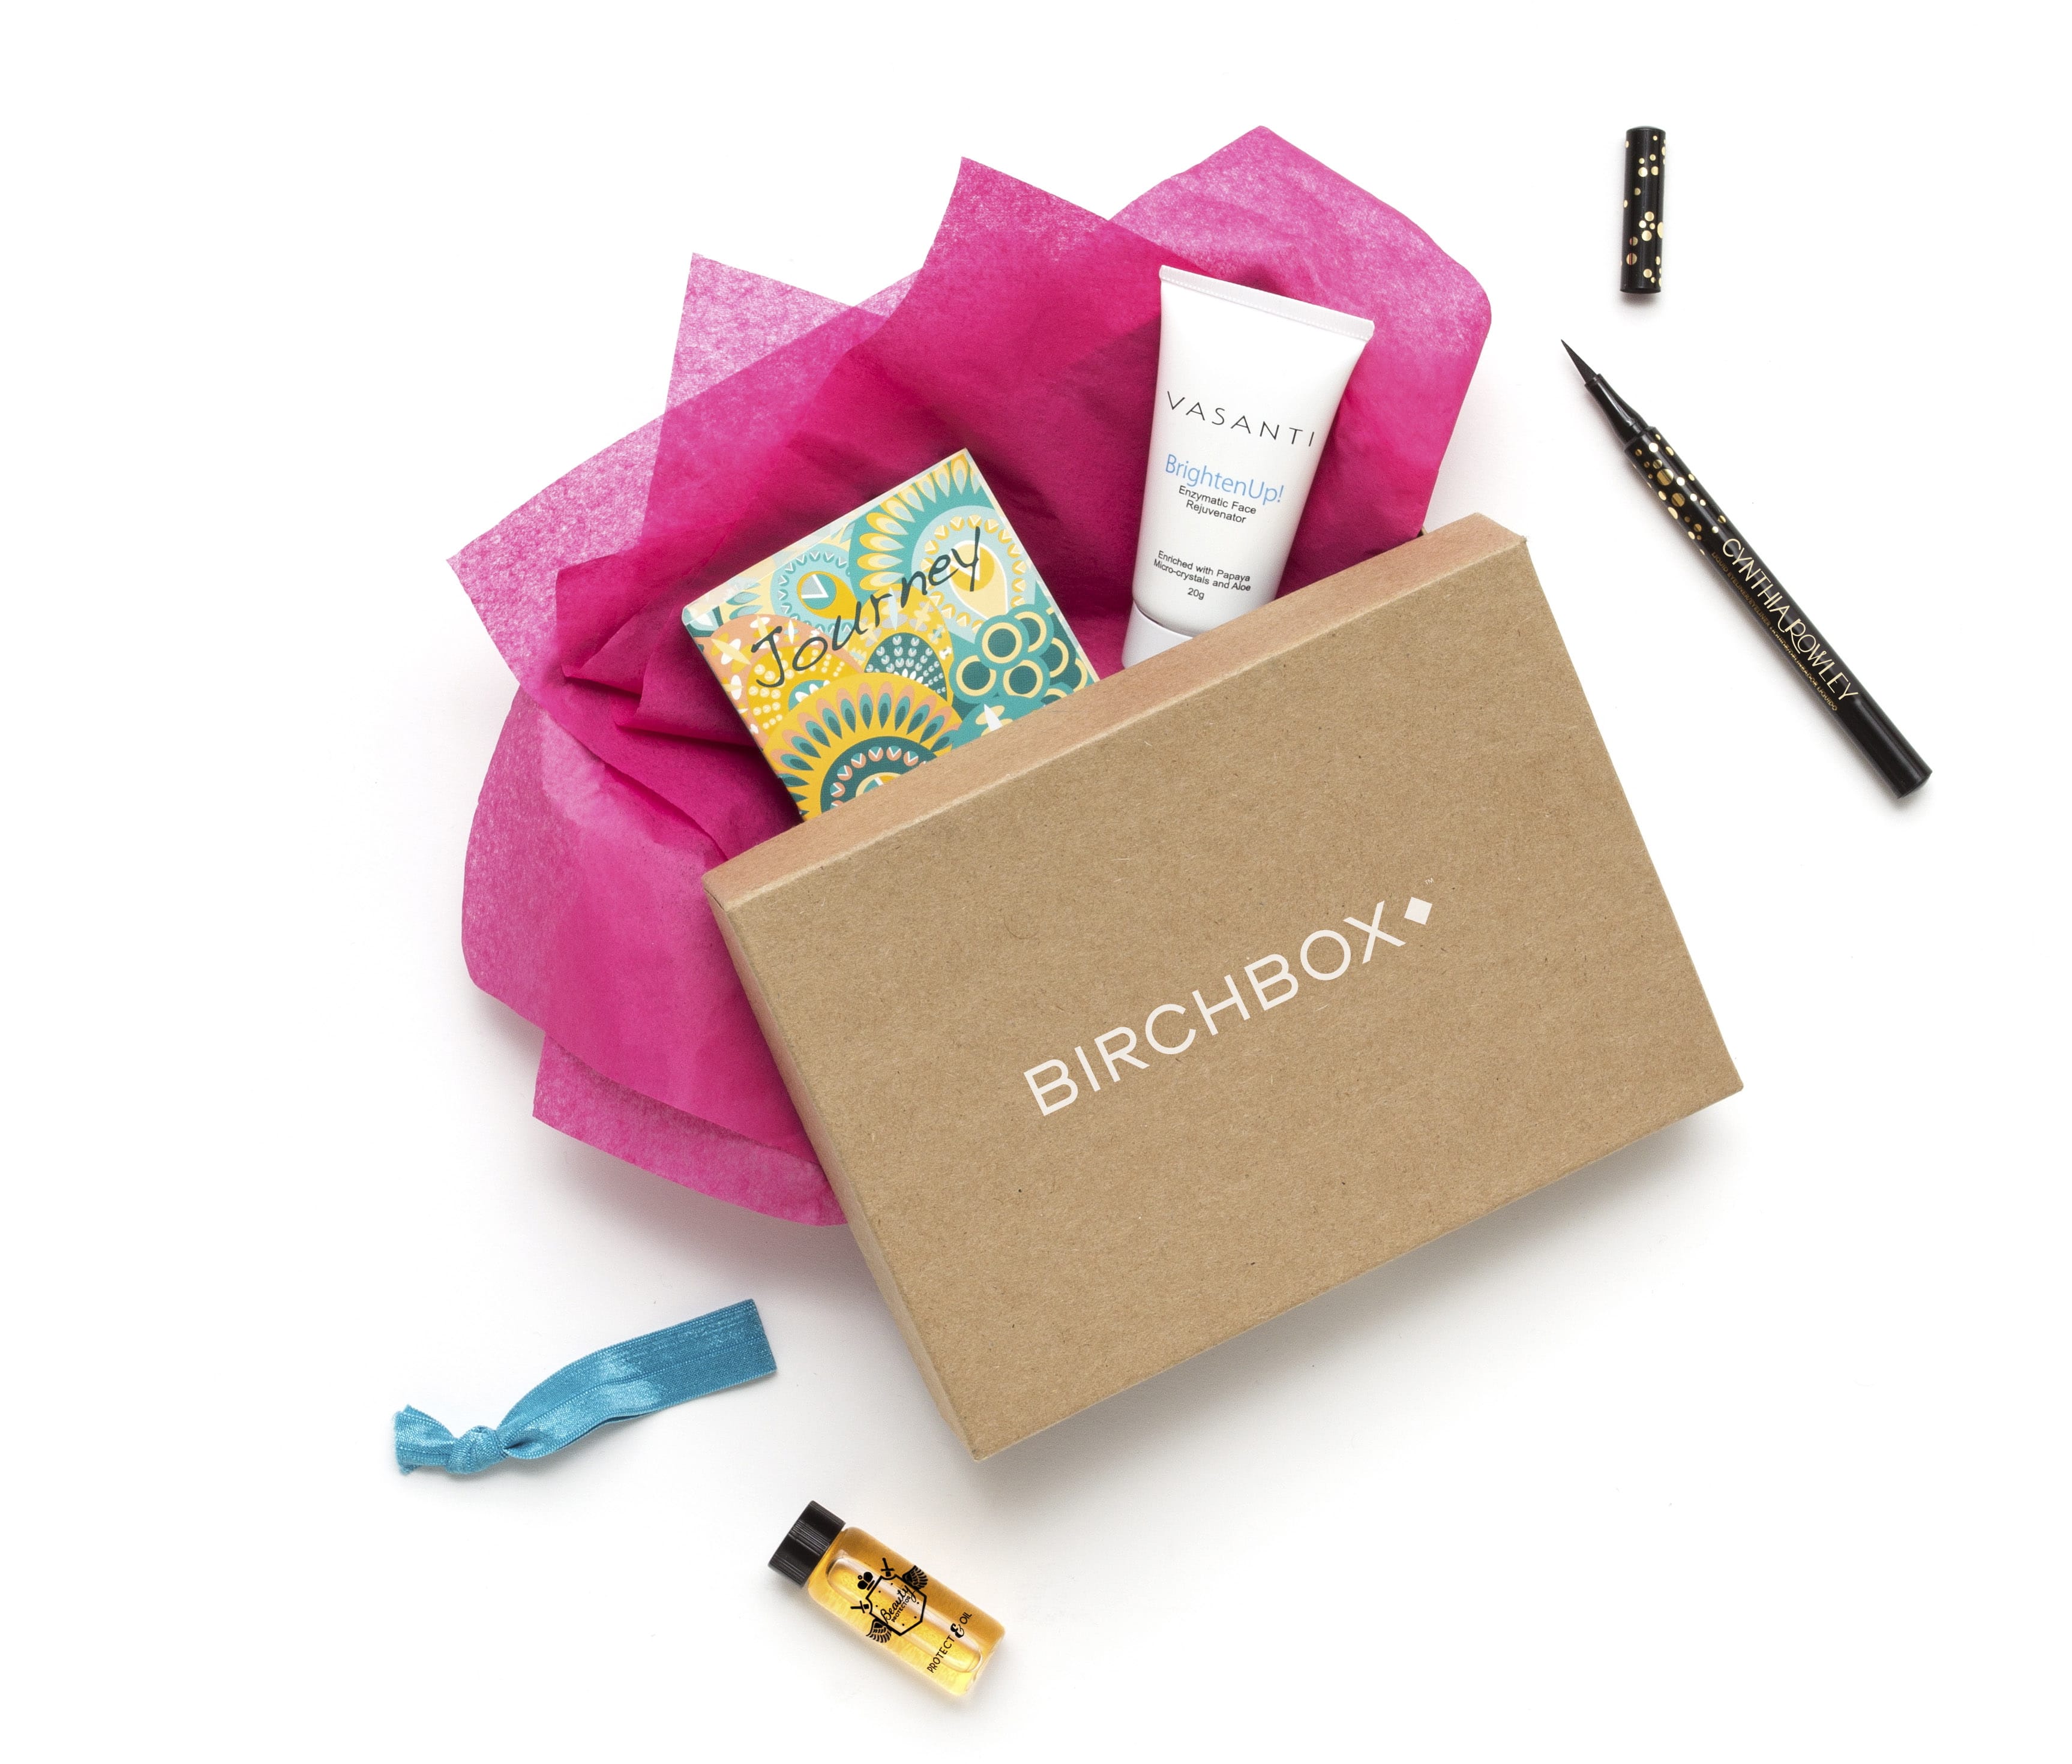 Consumers can subscribe to companies such as Birch Box to receive monthly shipments of beauty product samples.